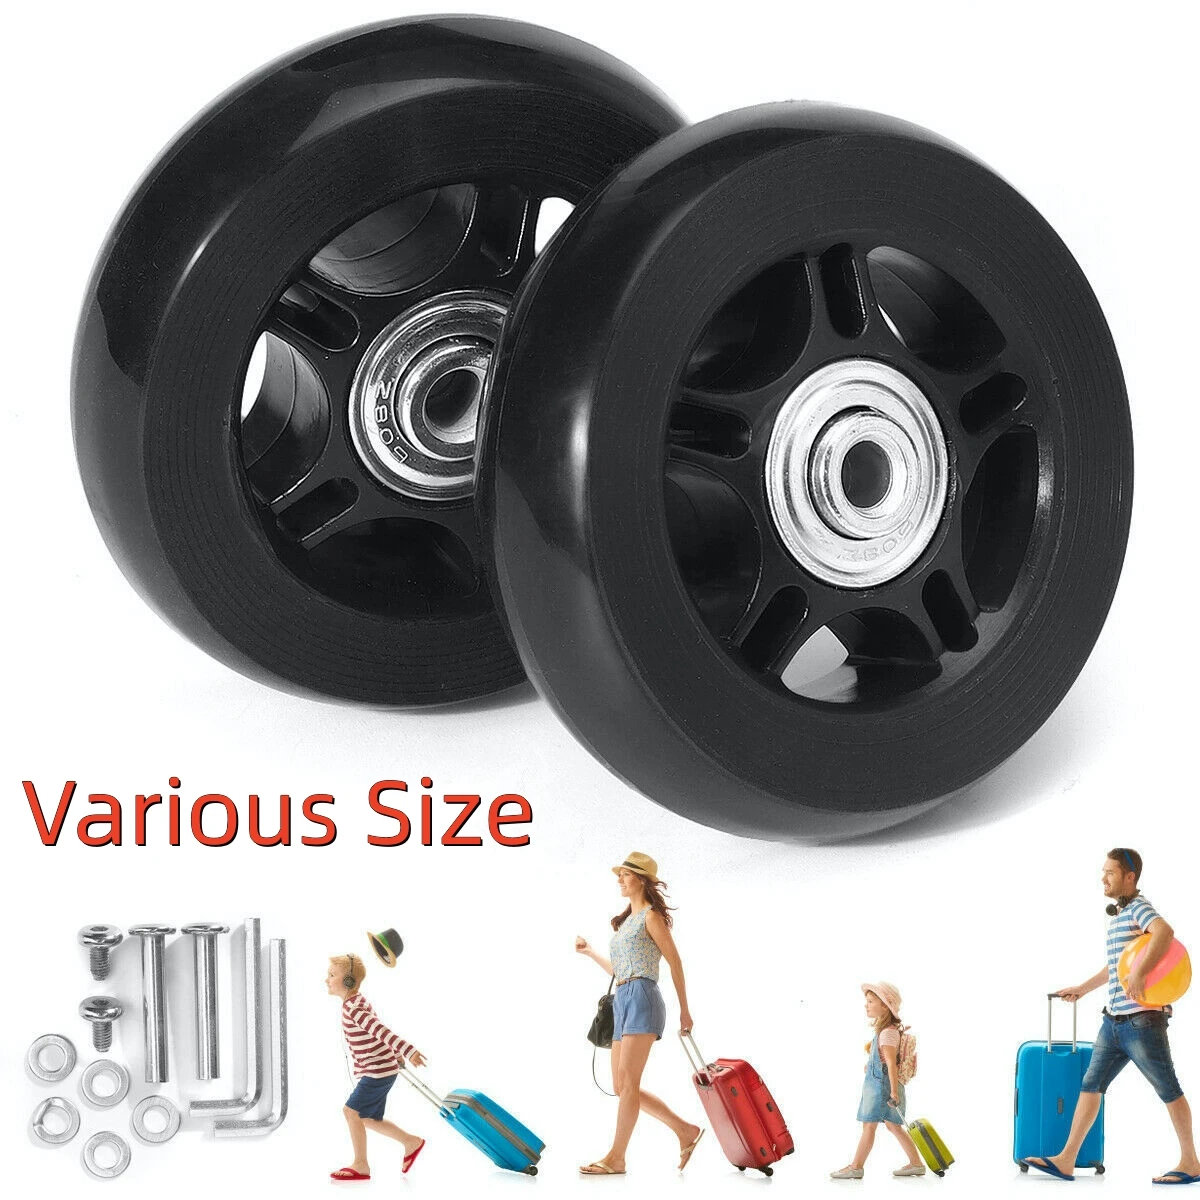 

Tools Travel Part Diy Repair Axles 2pcs Silent Wheels Suitcase Luggage Kit Caster Sliding Rubber Home Resistant Replacement